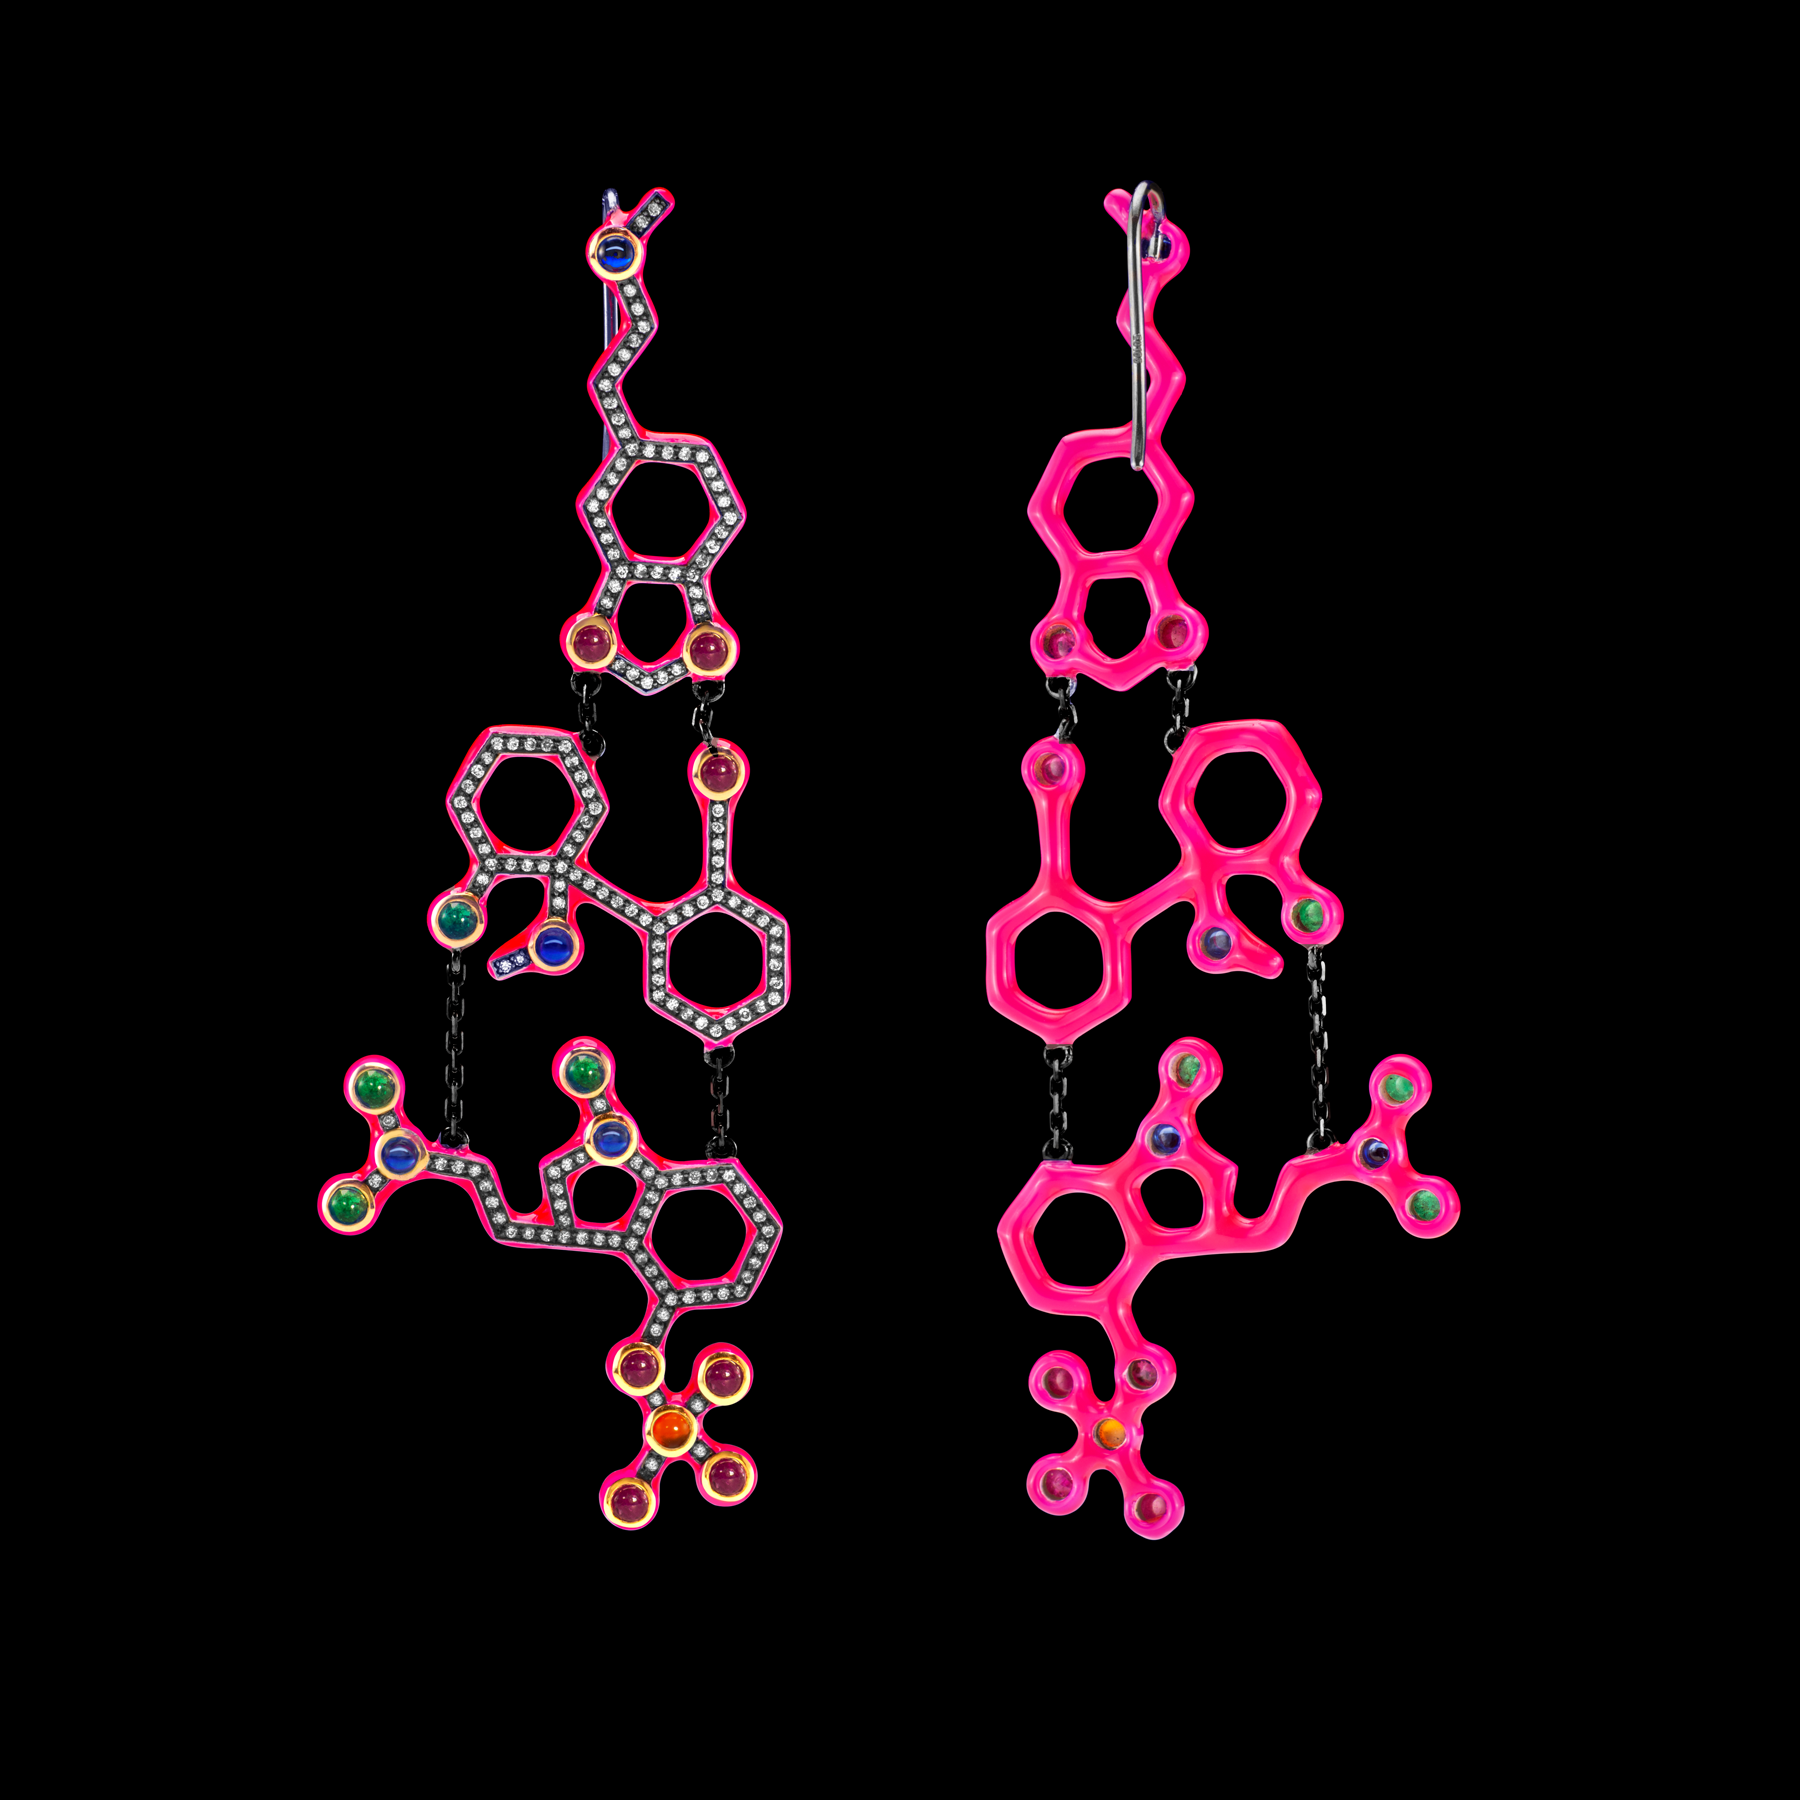 Euphorian earrings by designer Solange Azagury-Partridge - Blackened 18 carat White Gold Emerald, Sapphire, Ruby, Cornelian, Diamonds and neon pink enamel - Front and back view